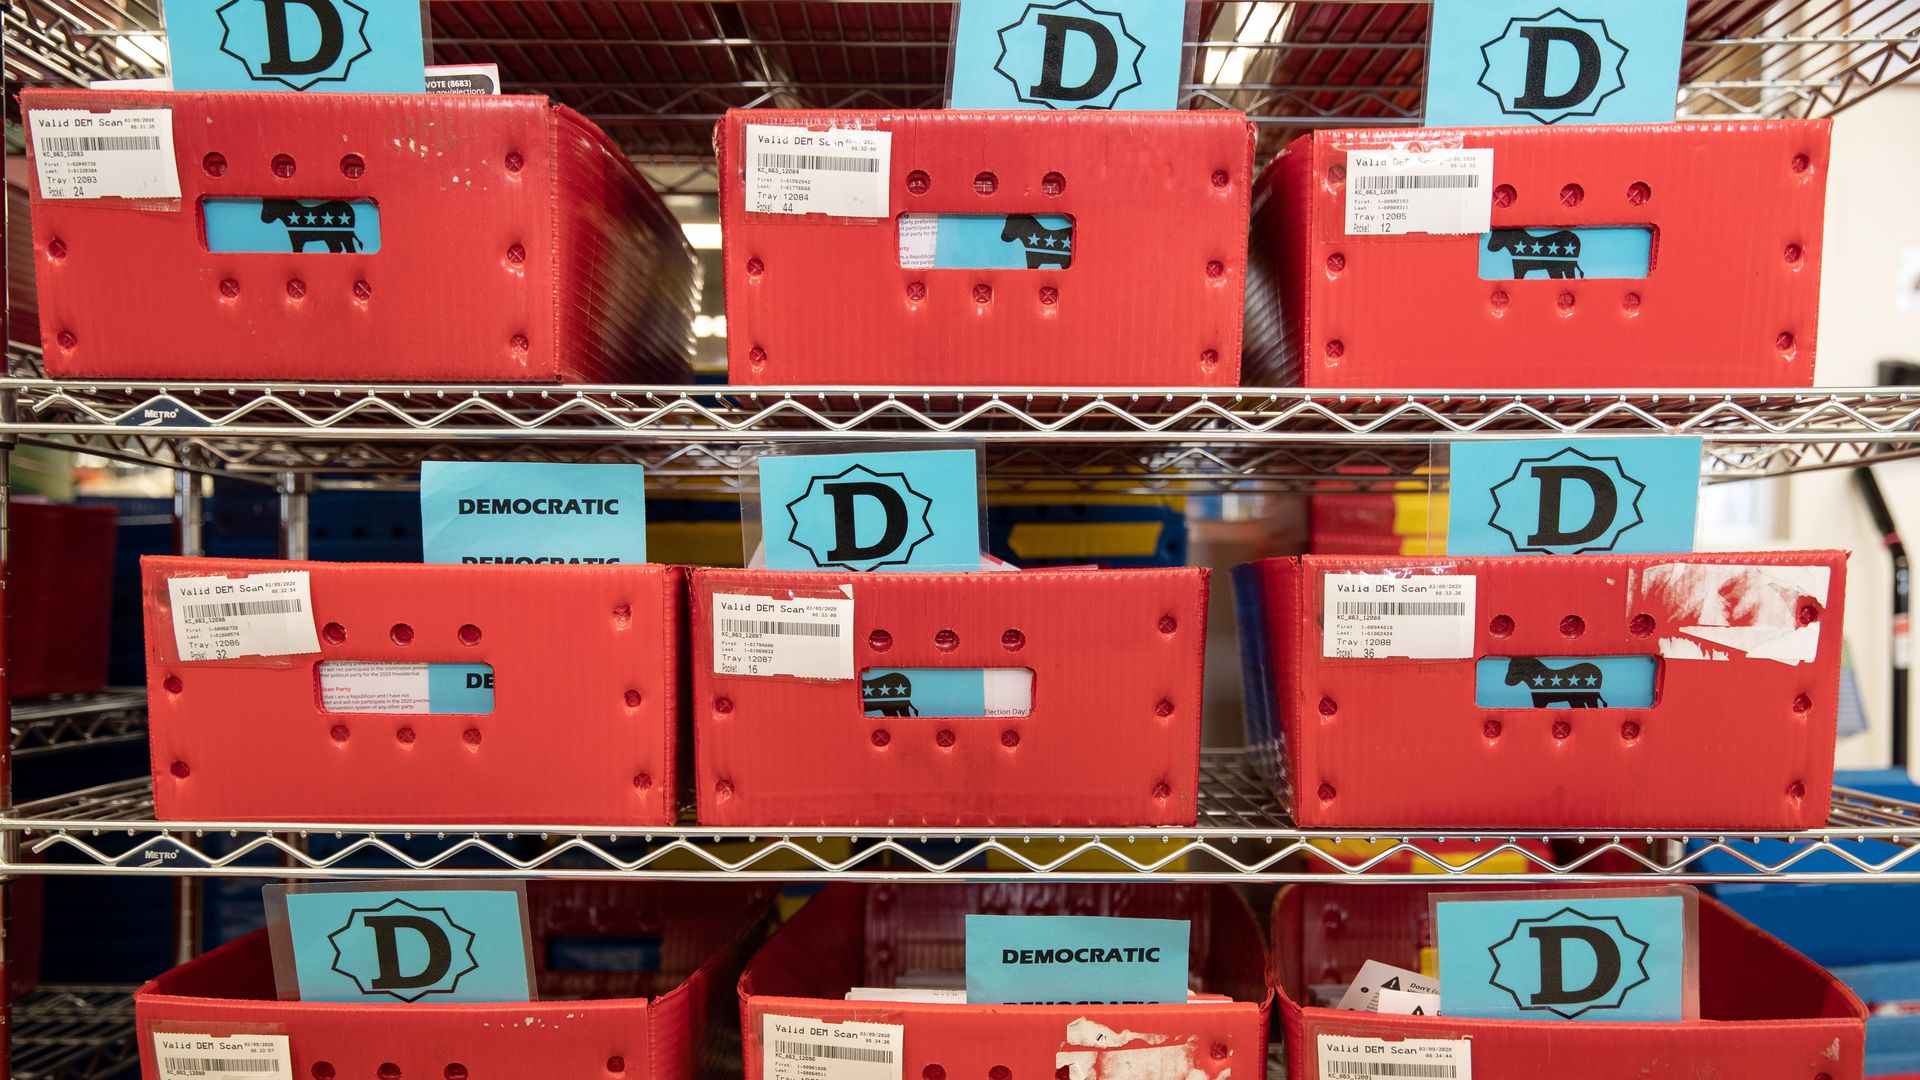 Red trays filled with mail-in primary ballots sit on shelves in Washington state.